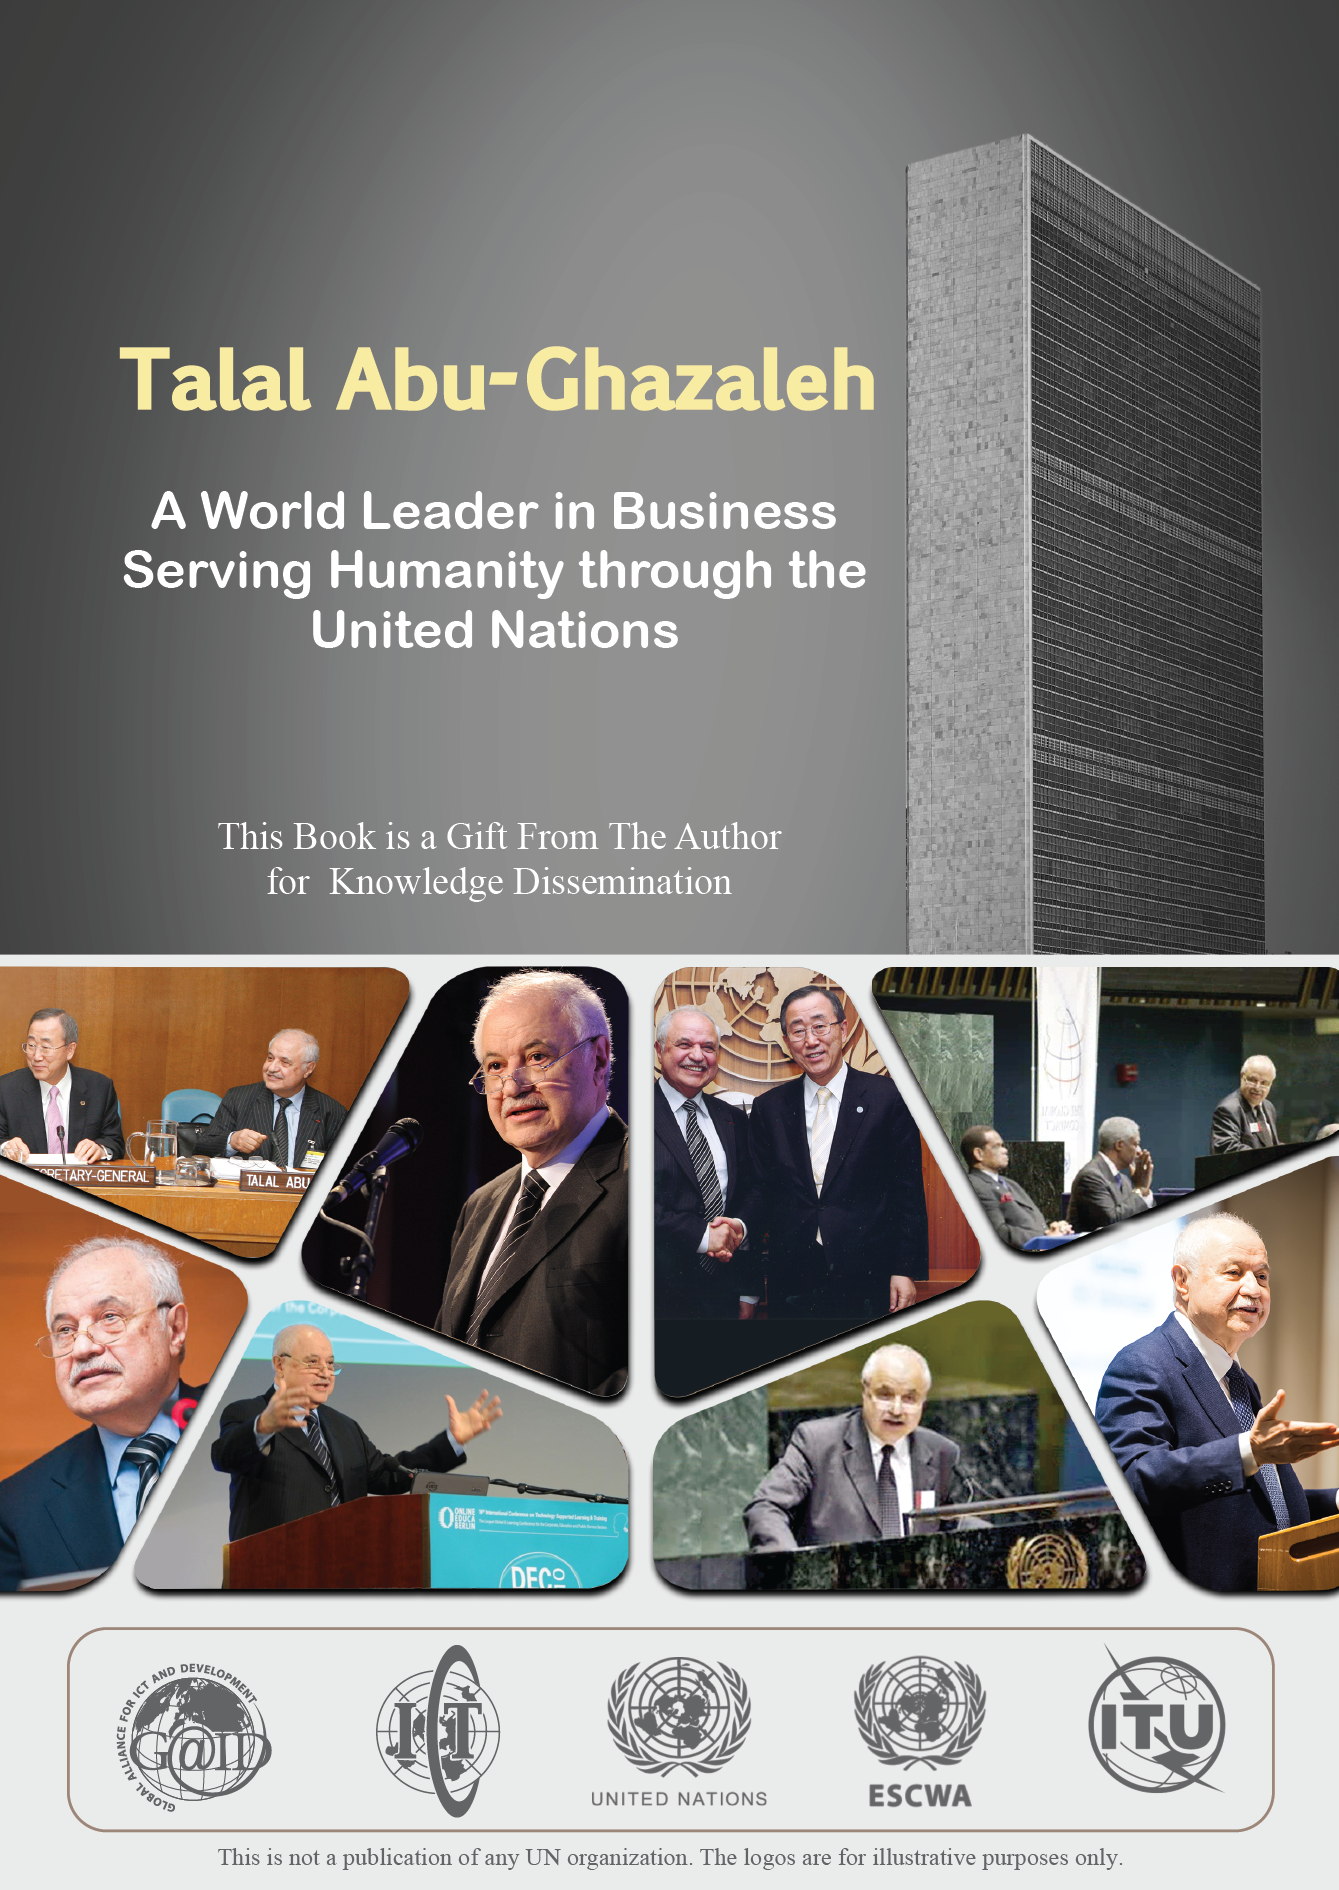 Documenting Talal Abu-Ghazaleh’s Roles at the United Nations in the service of humanity